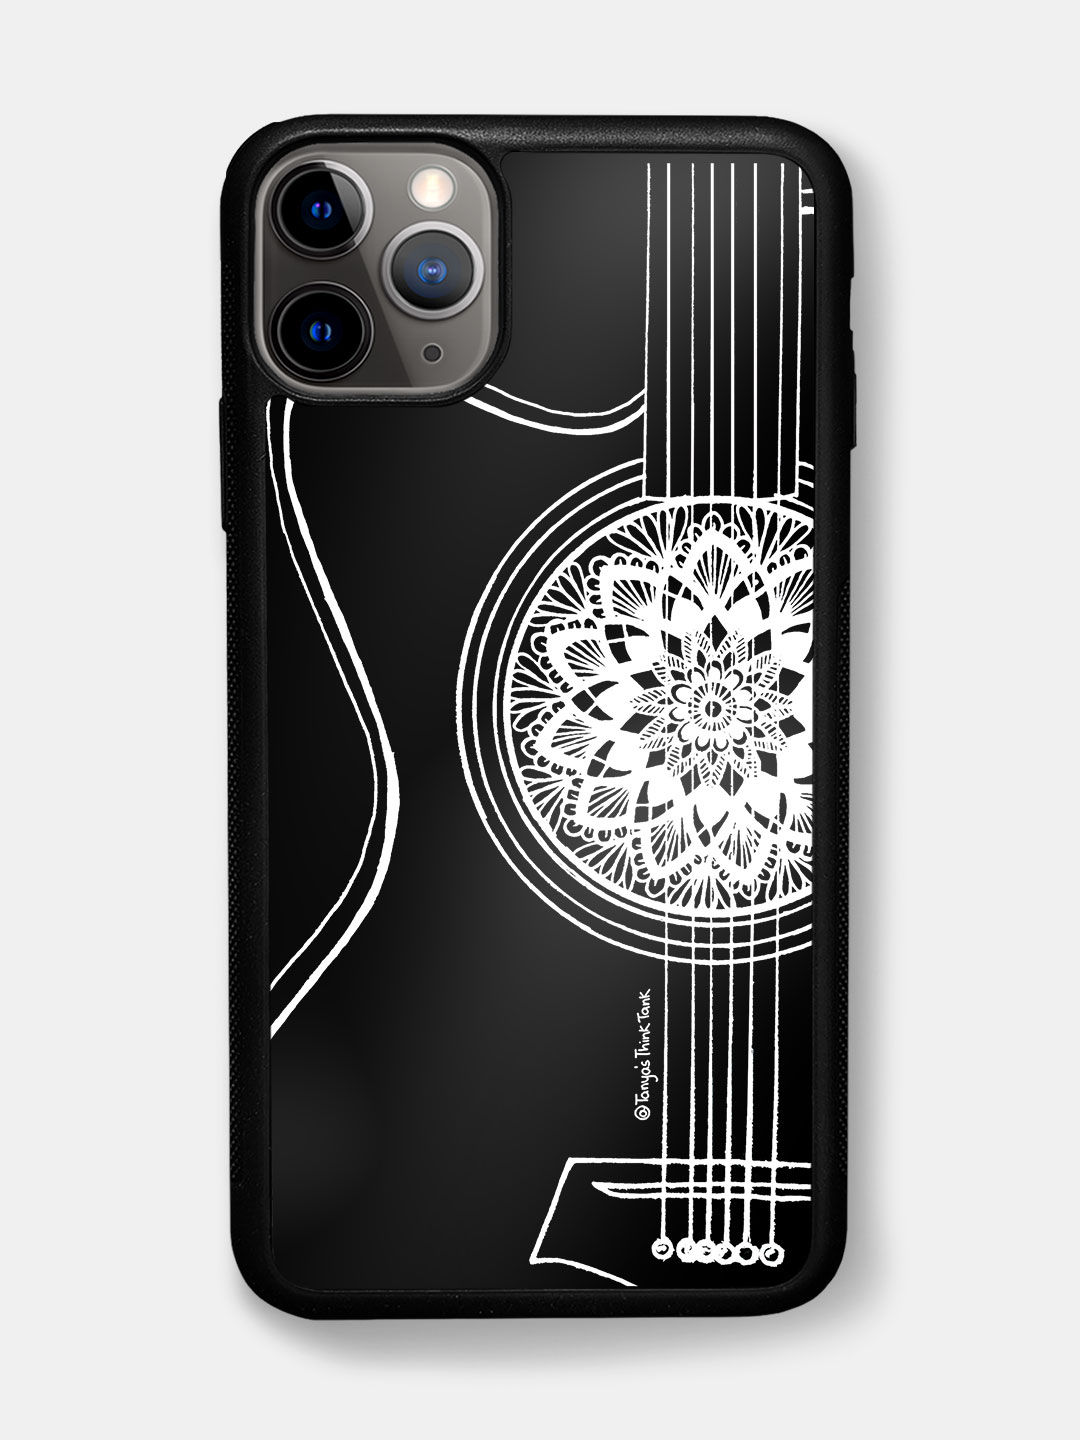 Buy Guitar White - Bumper Phone Case for iPhone 11 Pro Phone Cases & Covers Online